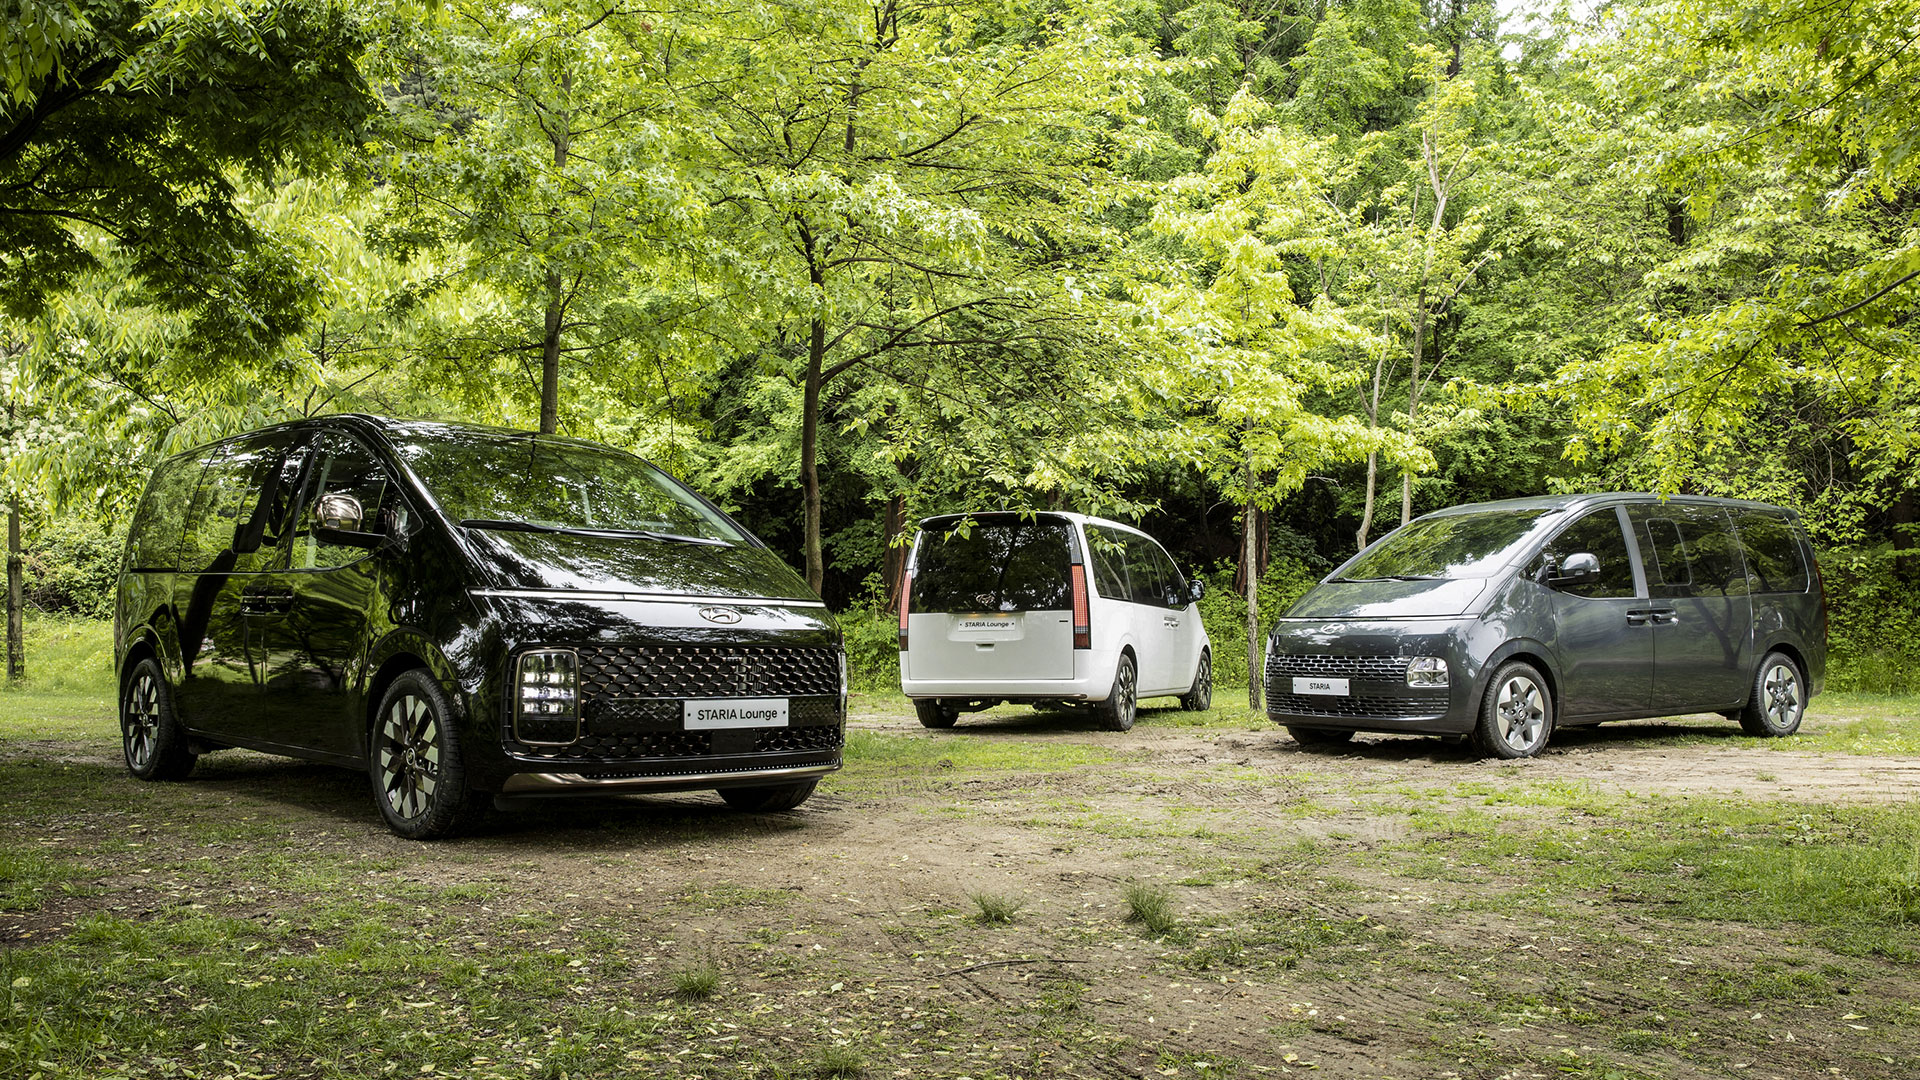 Three Hyundai STARIA parked in the forest